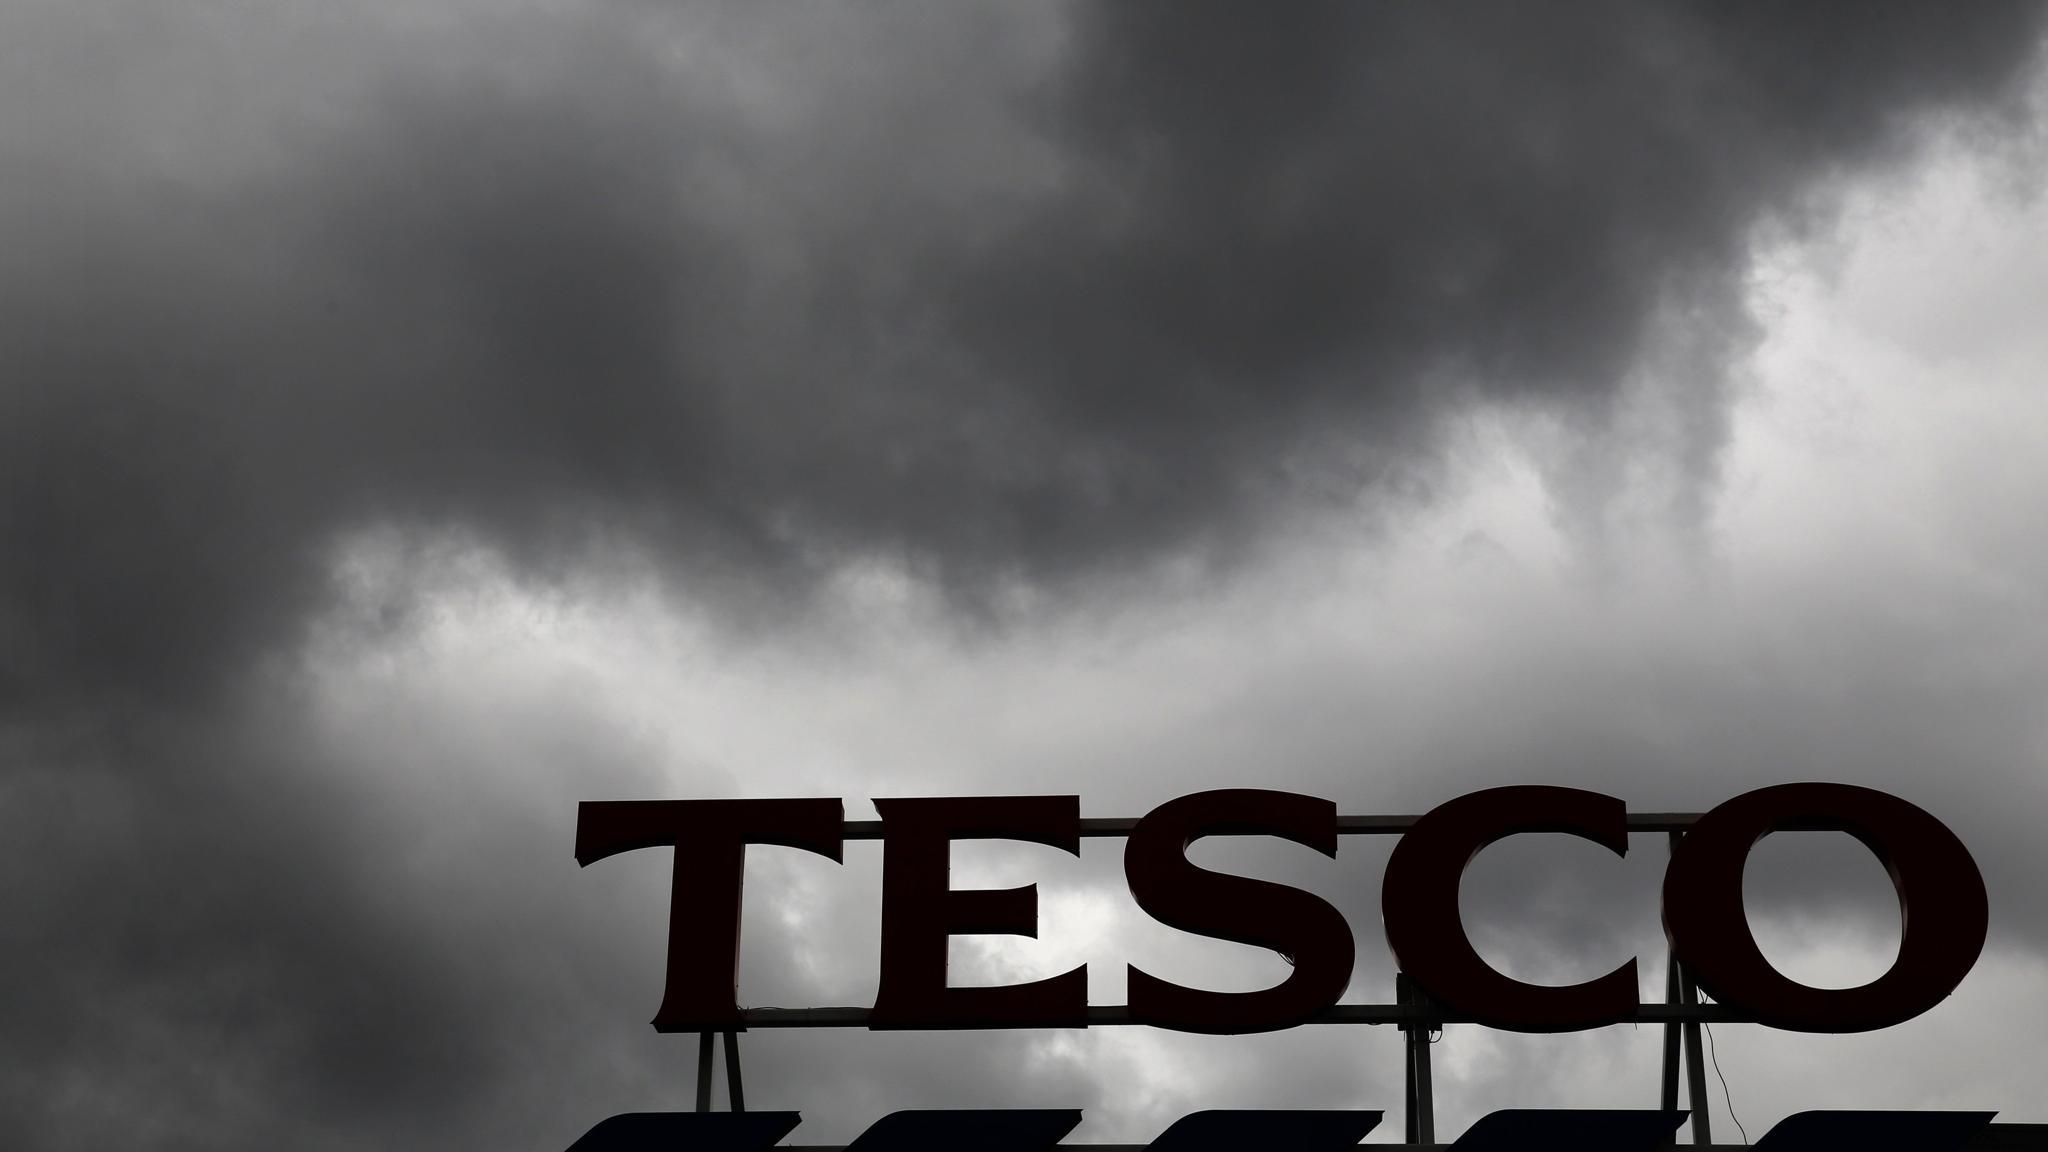 Tesco terminates Loop refillable product trial  Latest Retail Technology  News From Across The Globe HD wallpaper  Peakpx